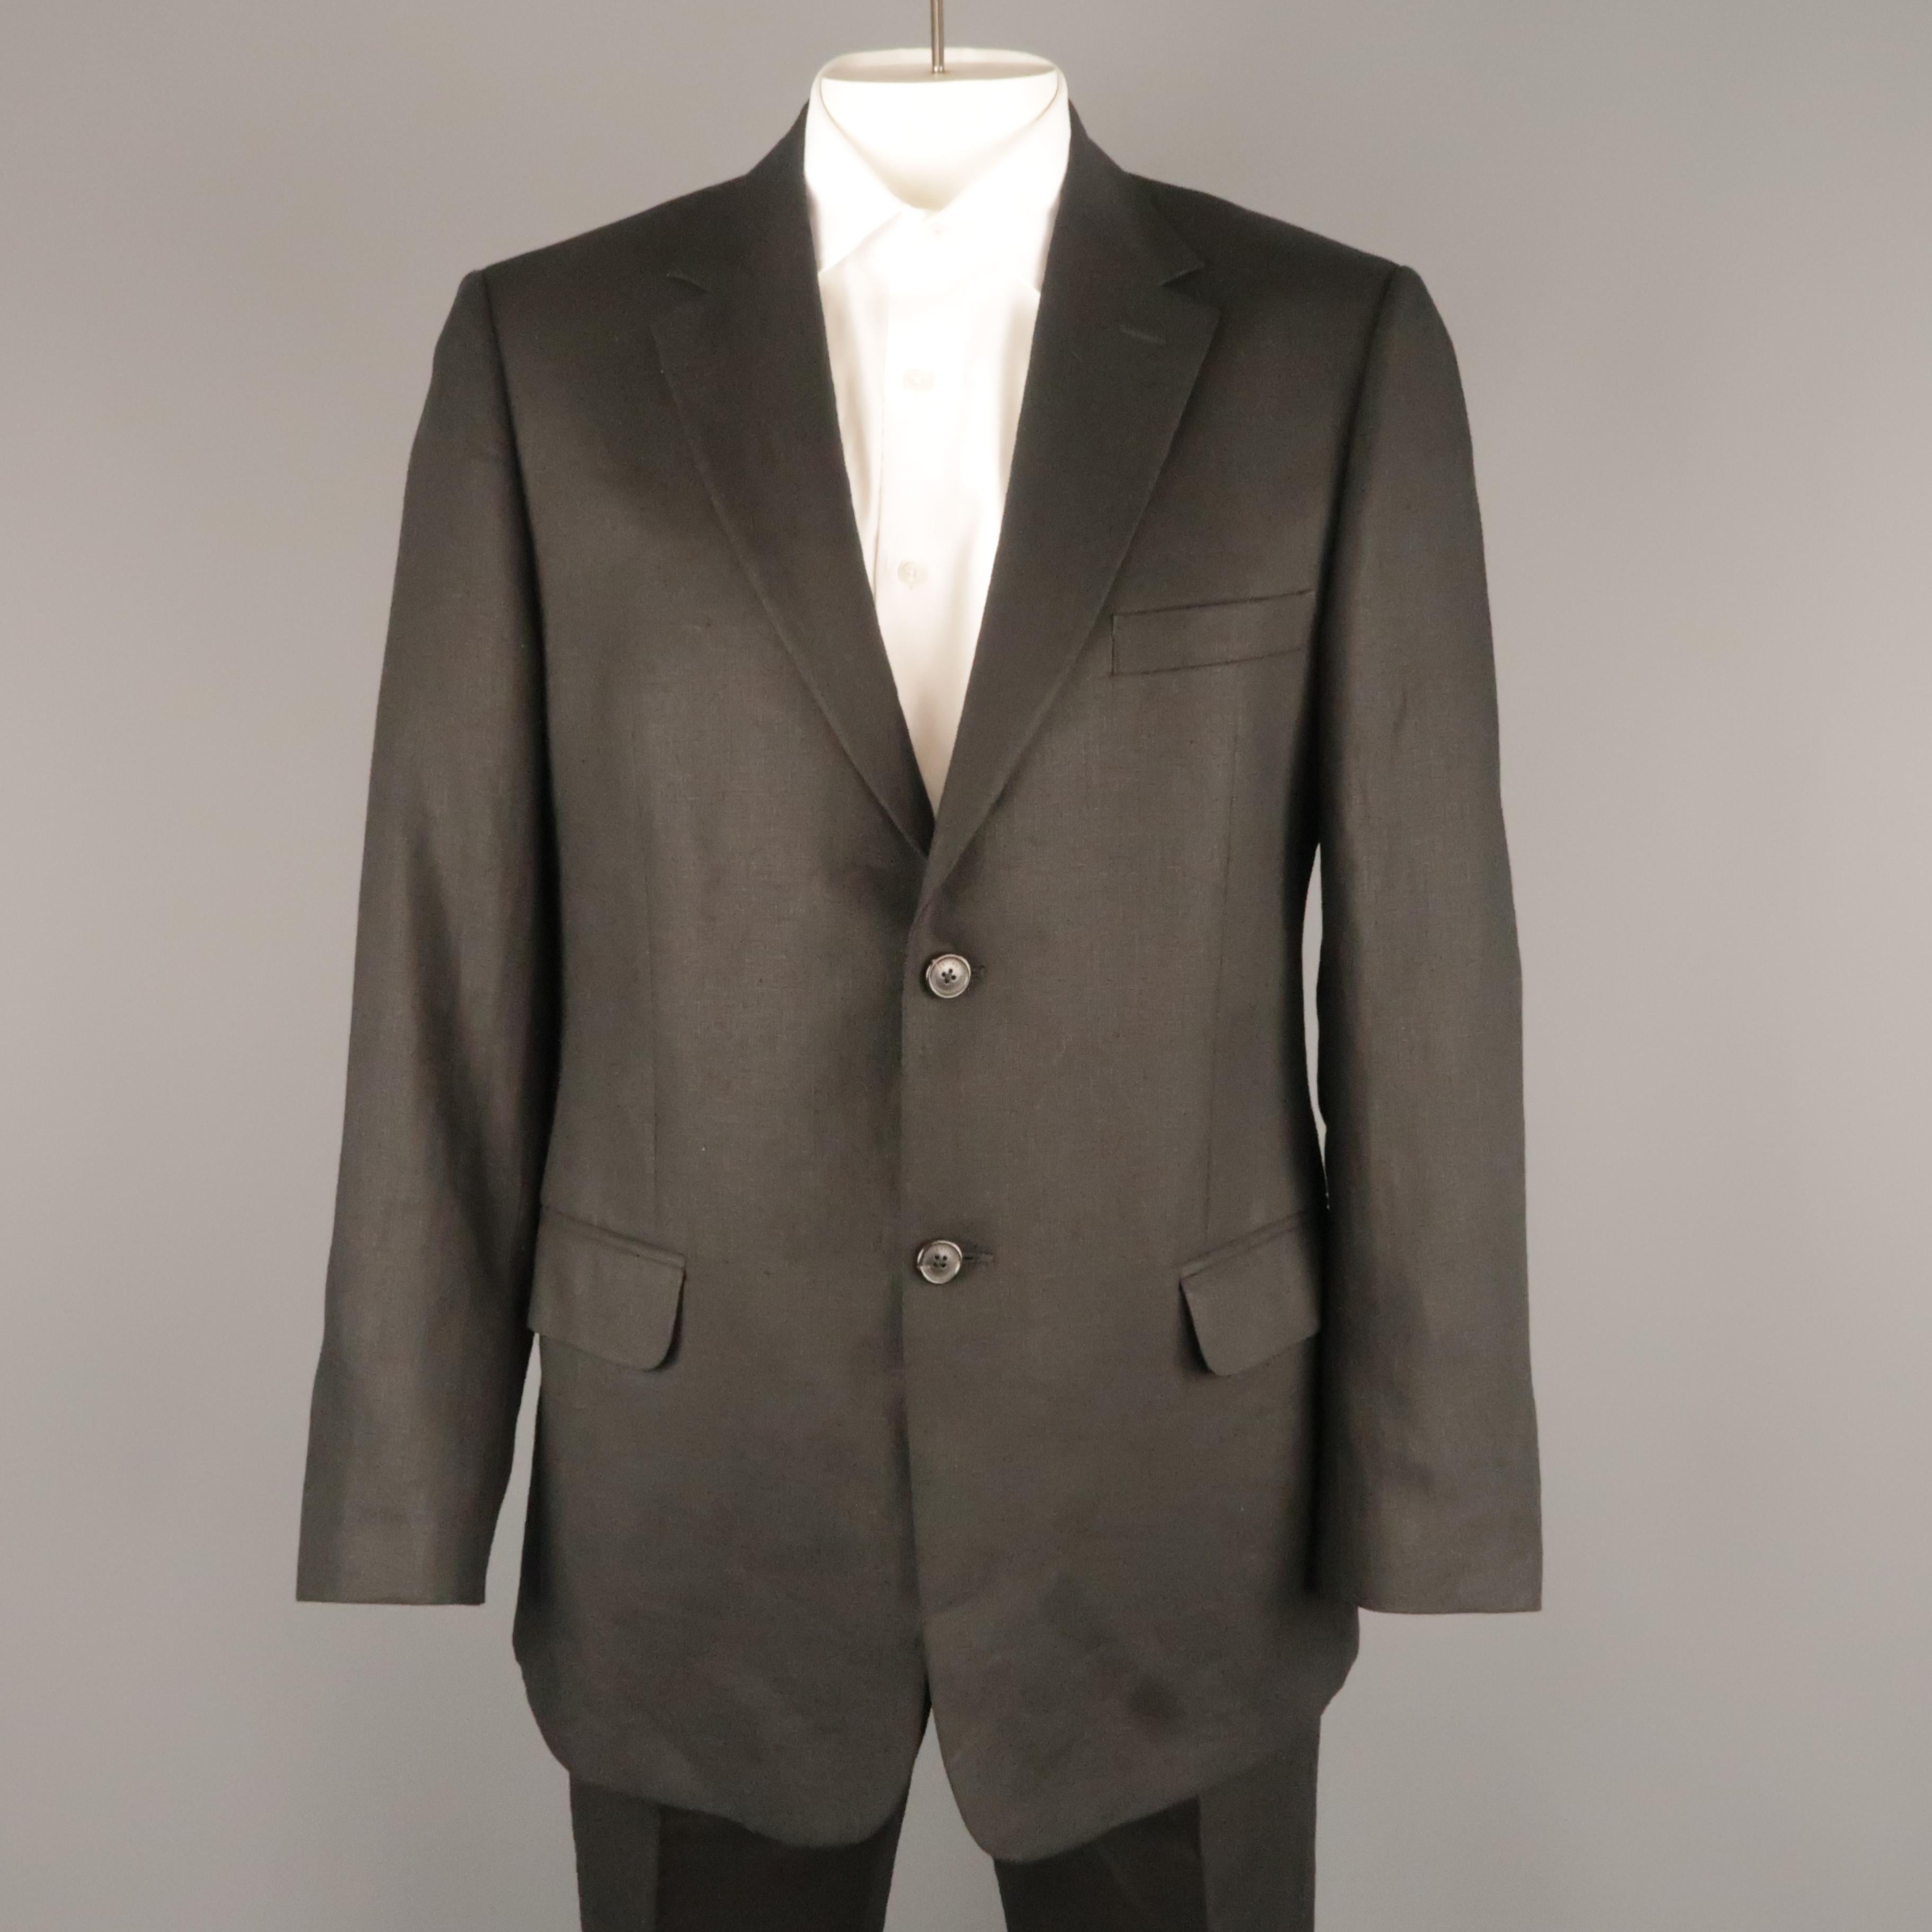 VALENTINO suit comes in black linen and includes a single breasted, two button sport coat with notch lapel and matching flat front trousers. Made in Italy.
 
Very Good Pre-Owned Condition.
Marked: (no size)
 
Measurements:
 
-Jacket
Shoulder: 19